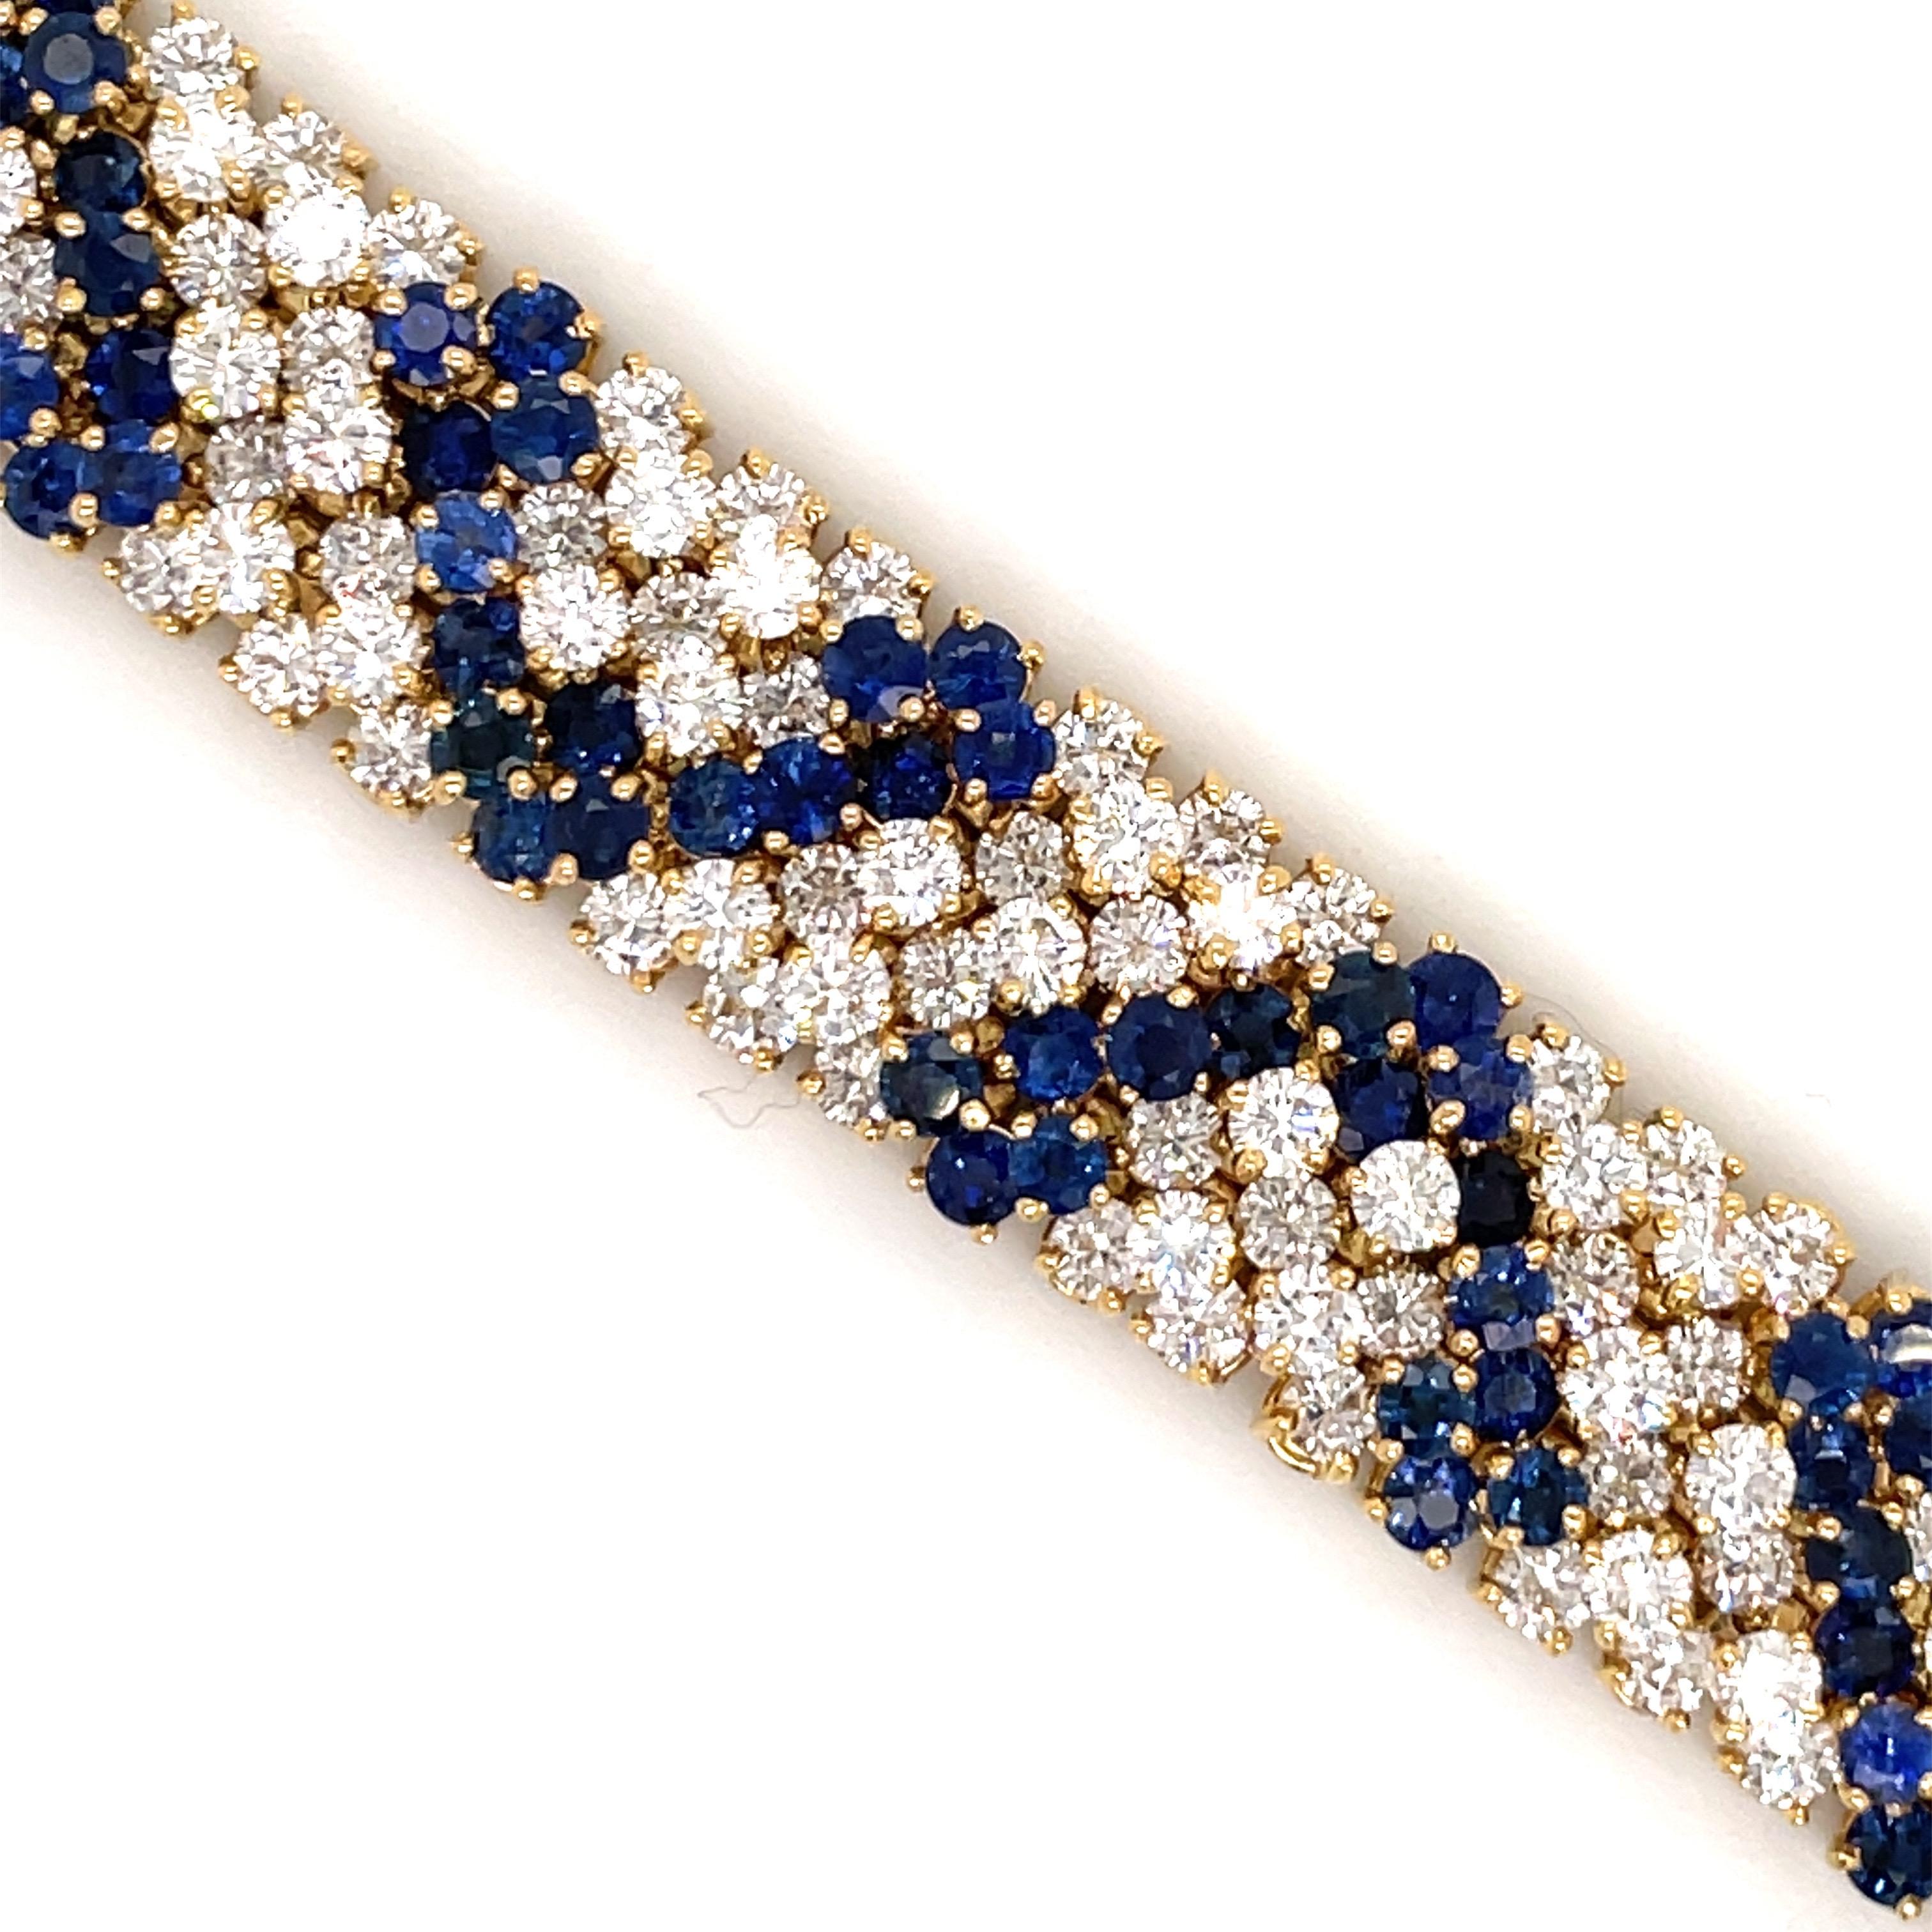 Hammerman Brothers flexible bracelet featuring 198 round brilliants weighing approximately 17 carats and 128 Vivid Blue Sapphires weighing approximately 18 carats, crafted in 18 Karat Yellow Gold 